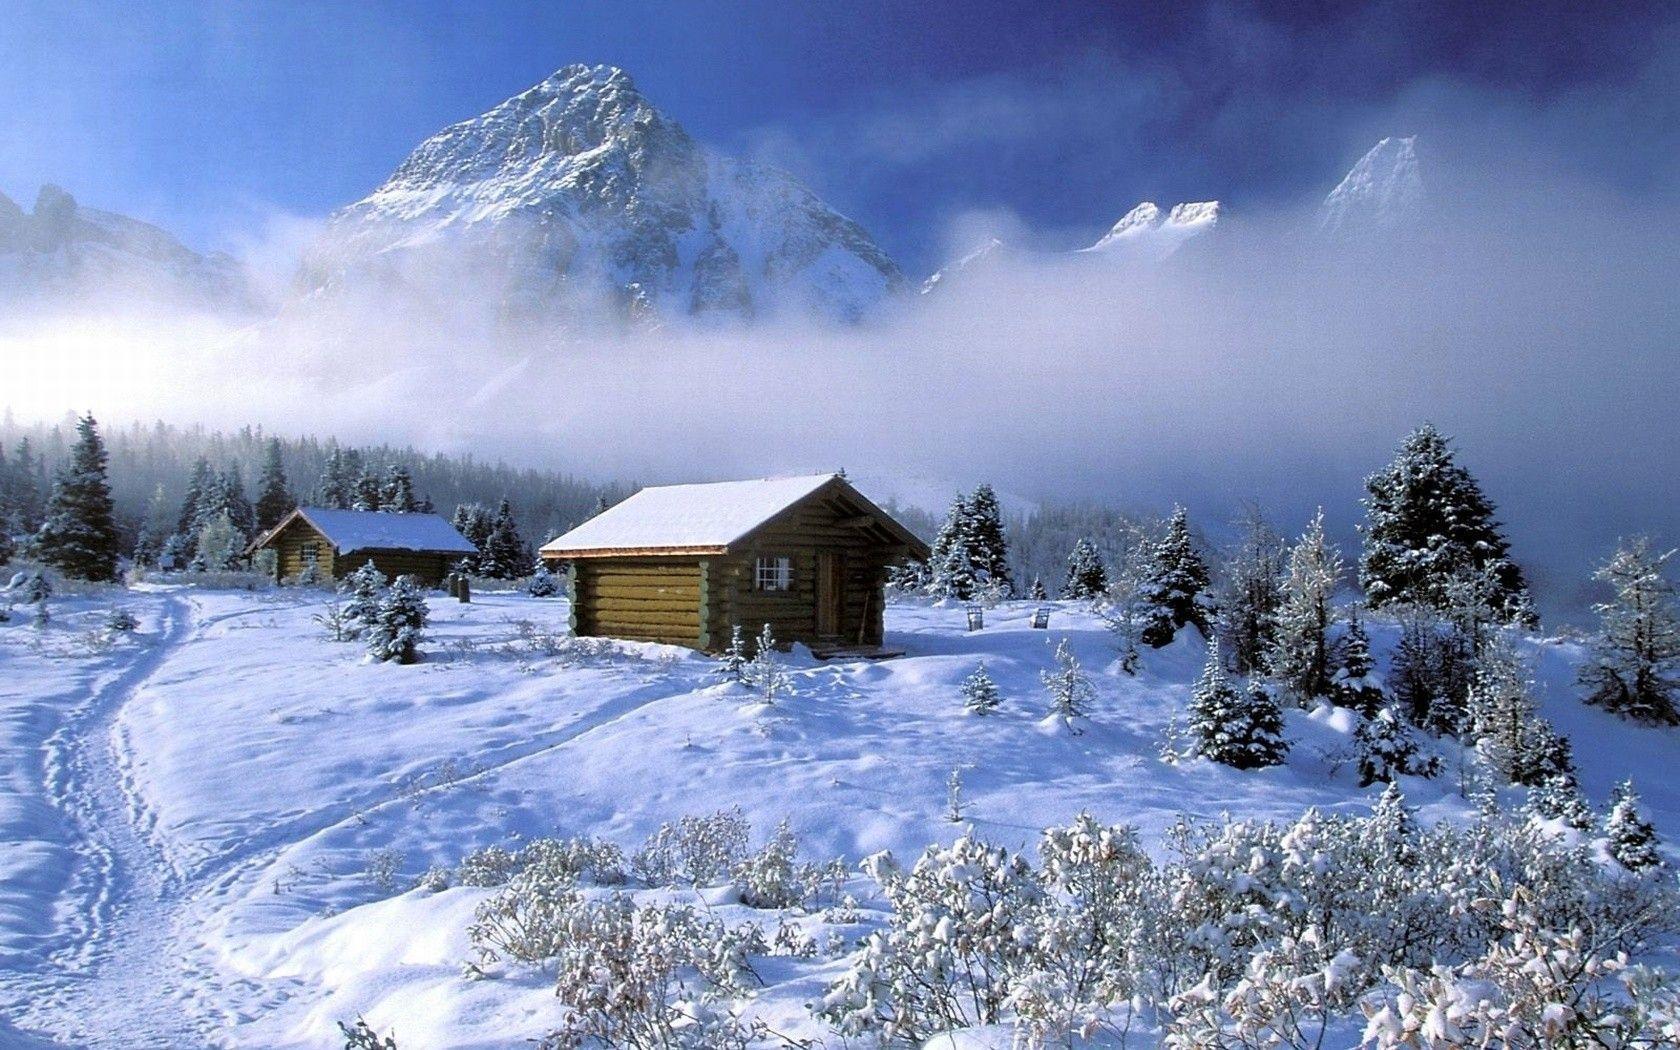 Cabin House In Mountains Wallpapers